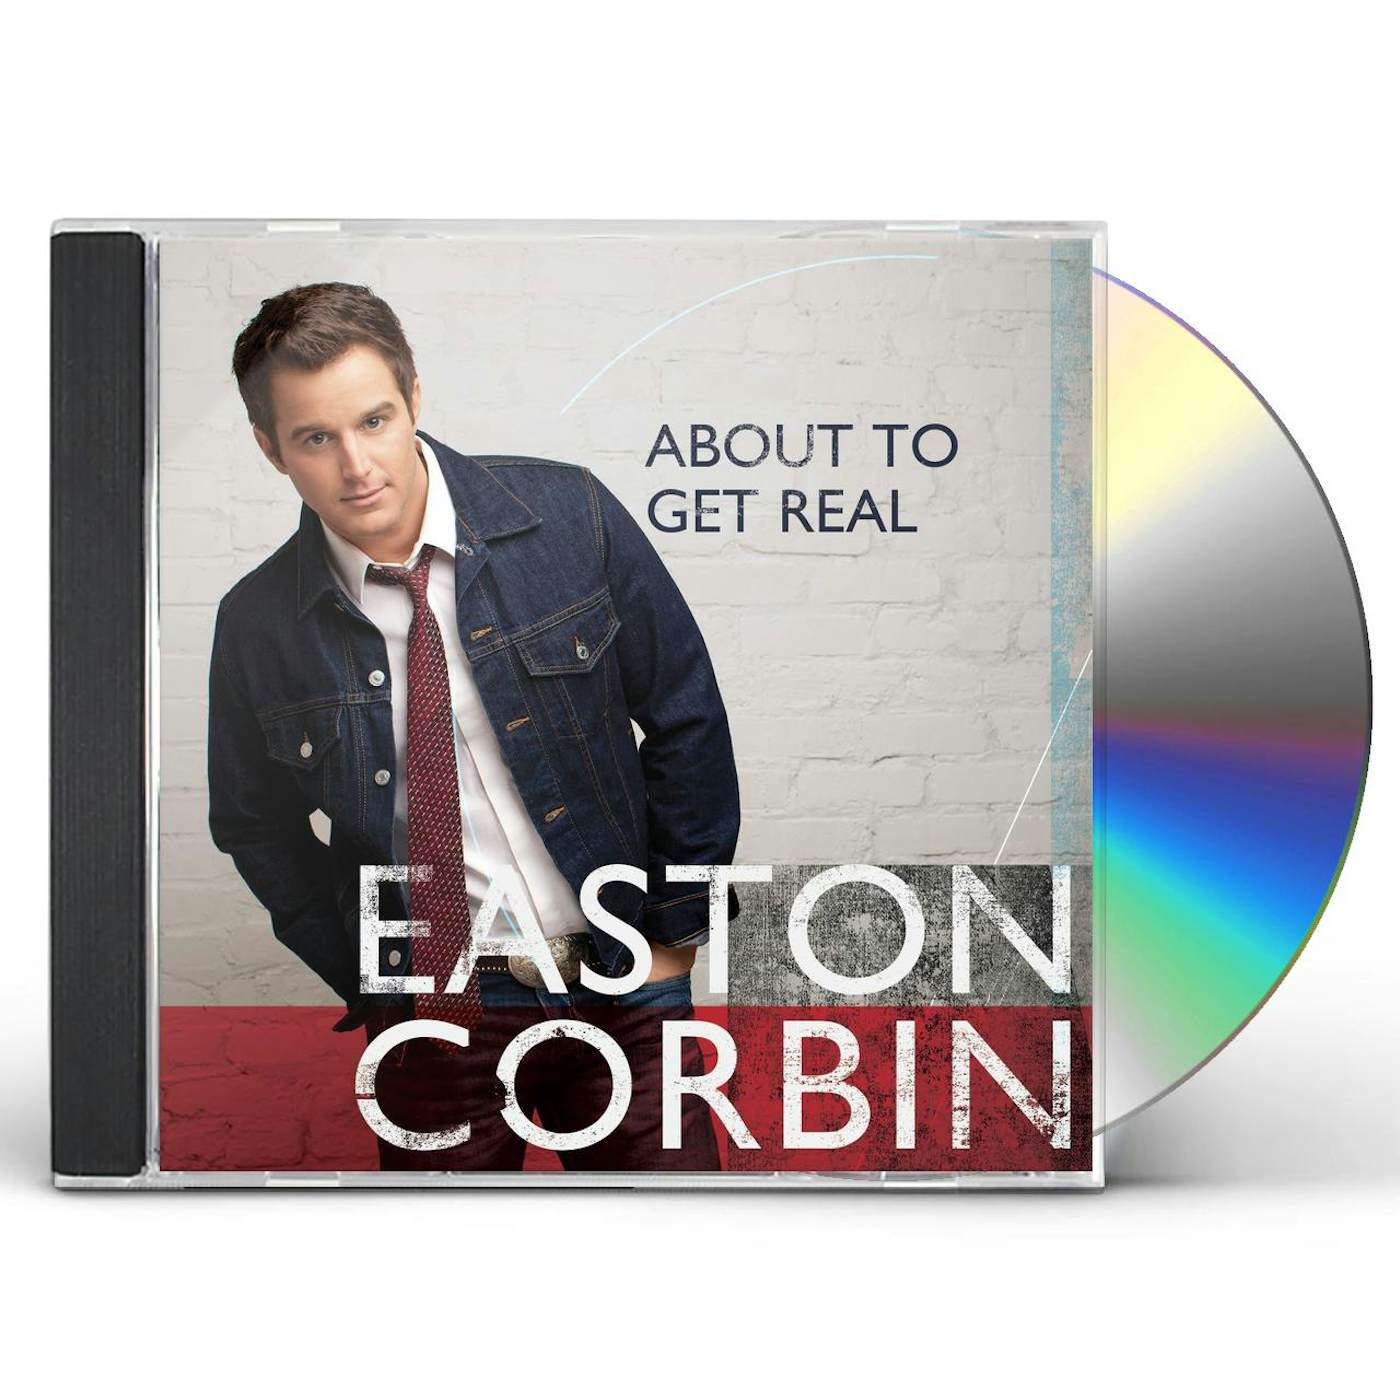 Easton Corbin ABOUT TO GET REAL CD